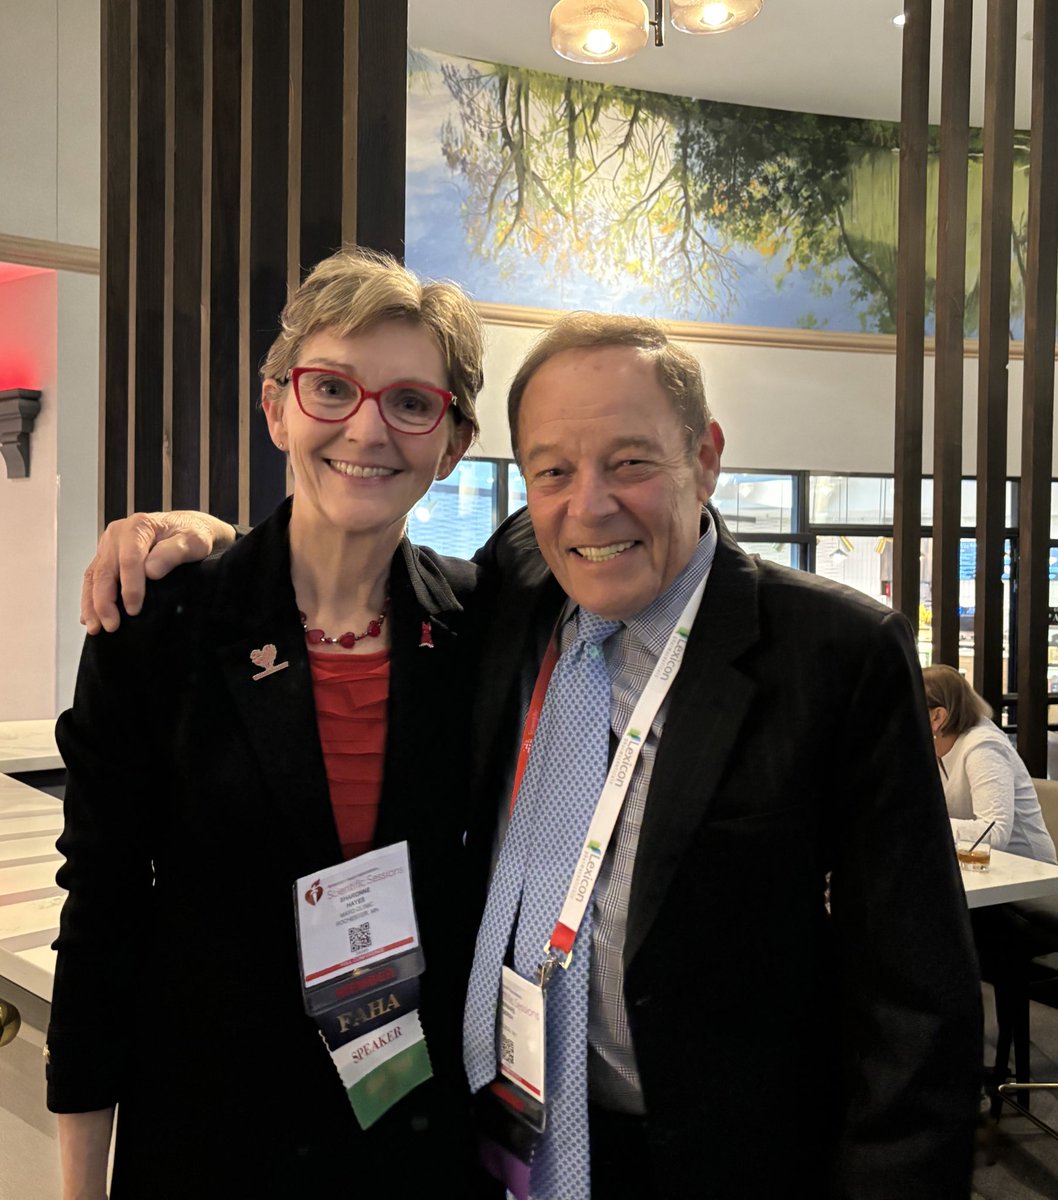 Congratulations @SharonneHayes for receiving the Laennec Clinician Lecture Award and @BernardGersh for receiving the Laennec Master Clinician Award at the #AHA23 @AHAScience Clinical Cardiology Council Dinner @MayoClinic @MayoClinicHS @MayoCVFellows @MayoCVservices @MayoClinicCV